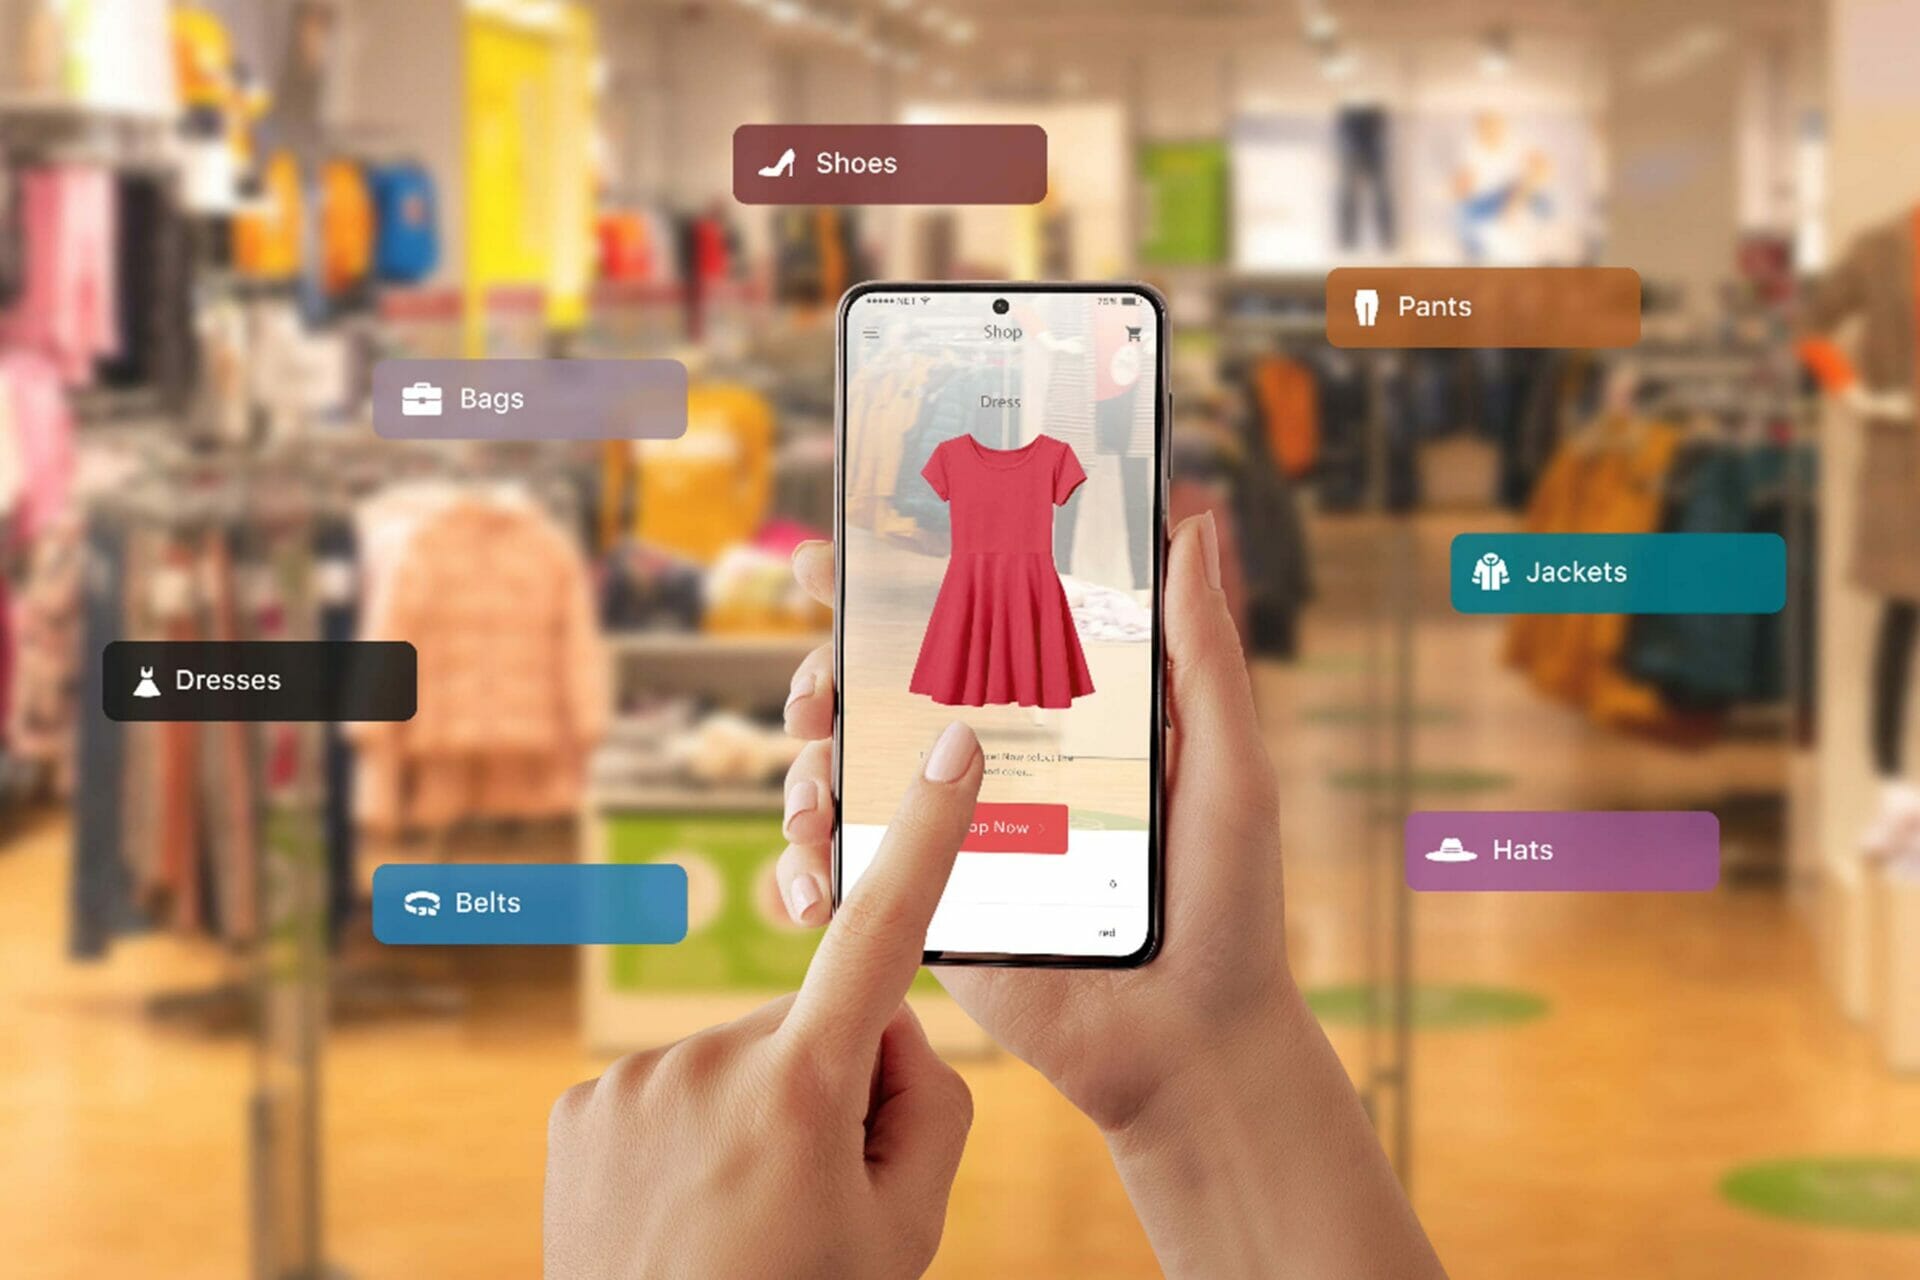 Explore how Augmented Reality can create immersive, interactive experiences that boost engagement & influence buying decisions on Amazon.